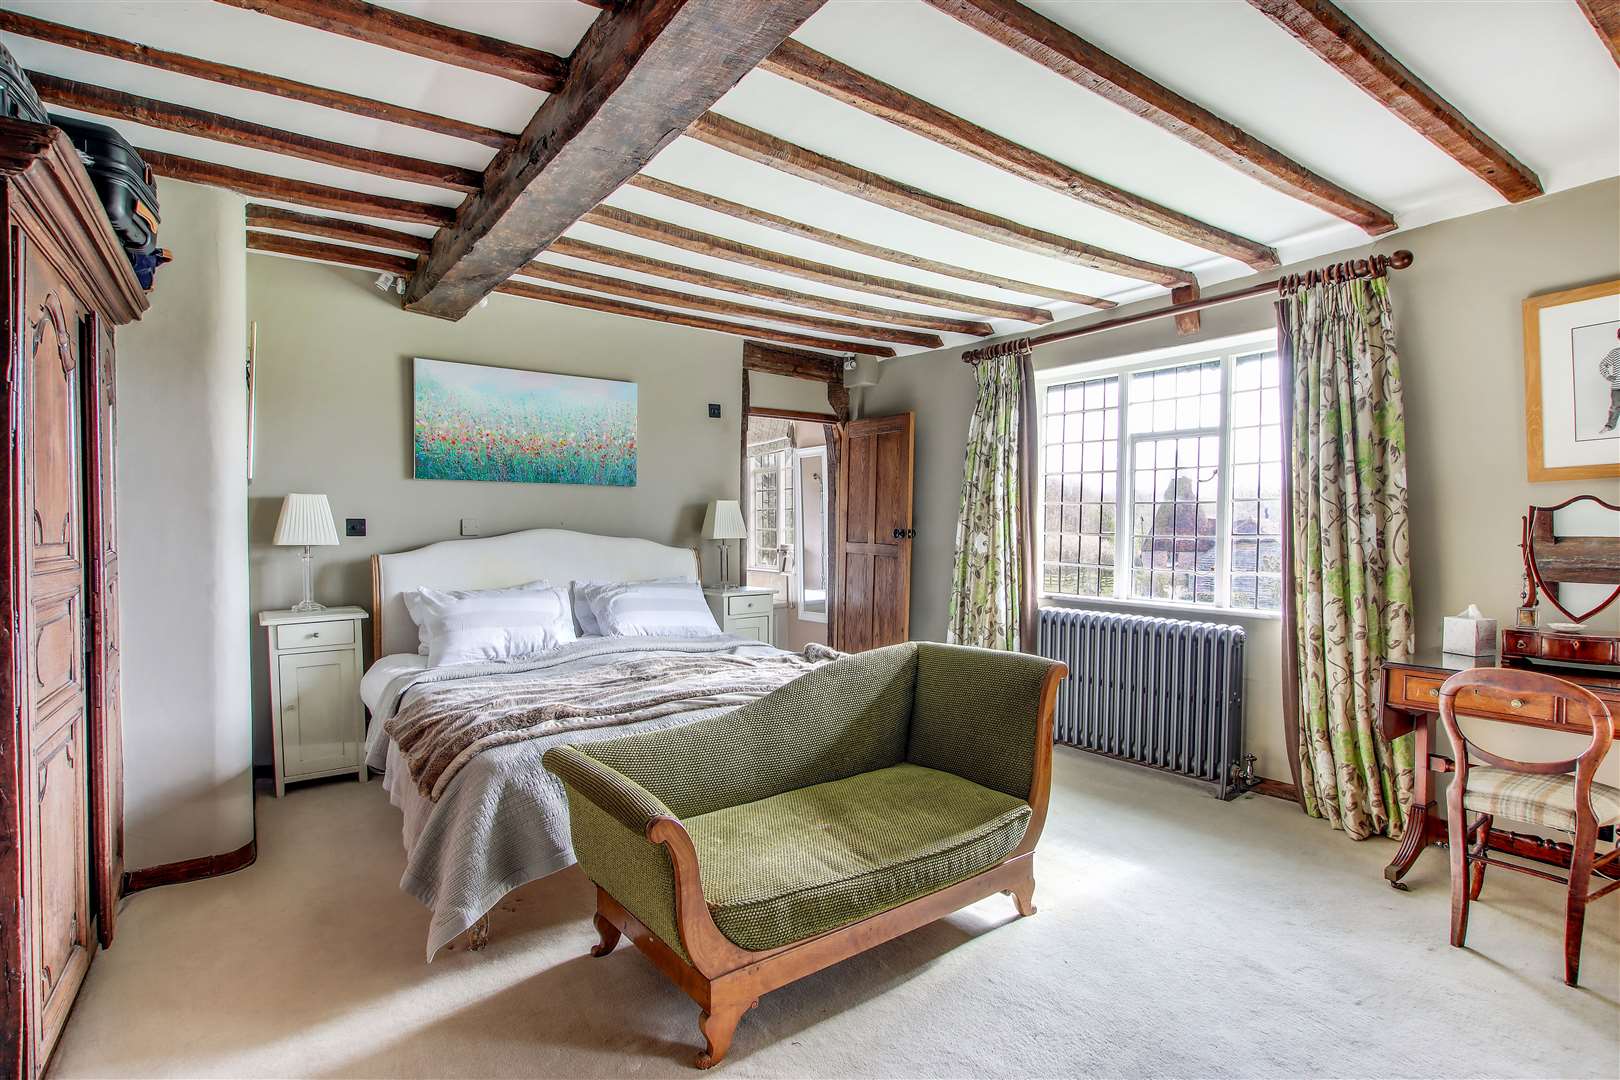 Old wooden beams can be found throughout the historic property on the outskirts of Biddenden, near Tenterden